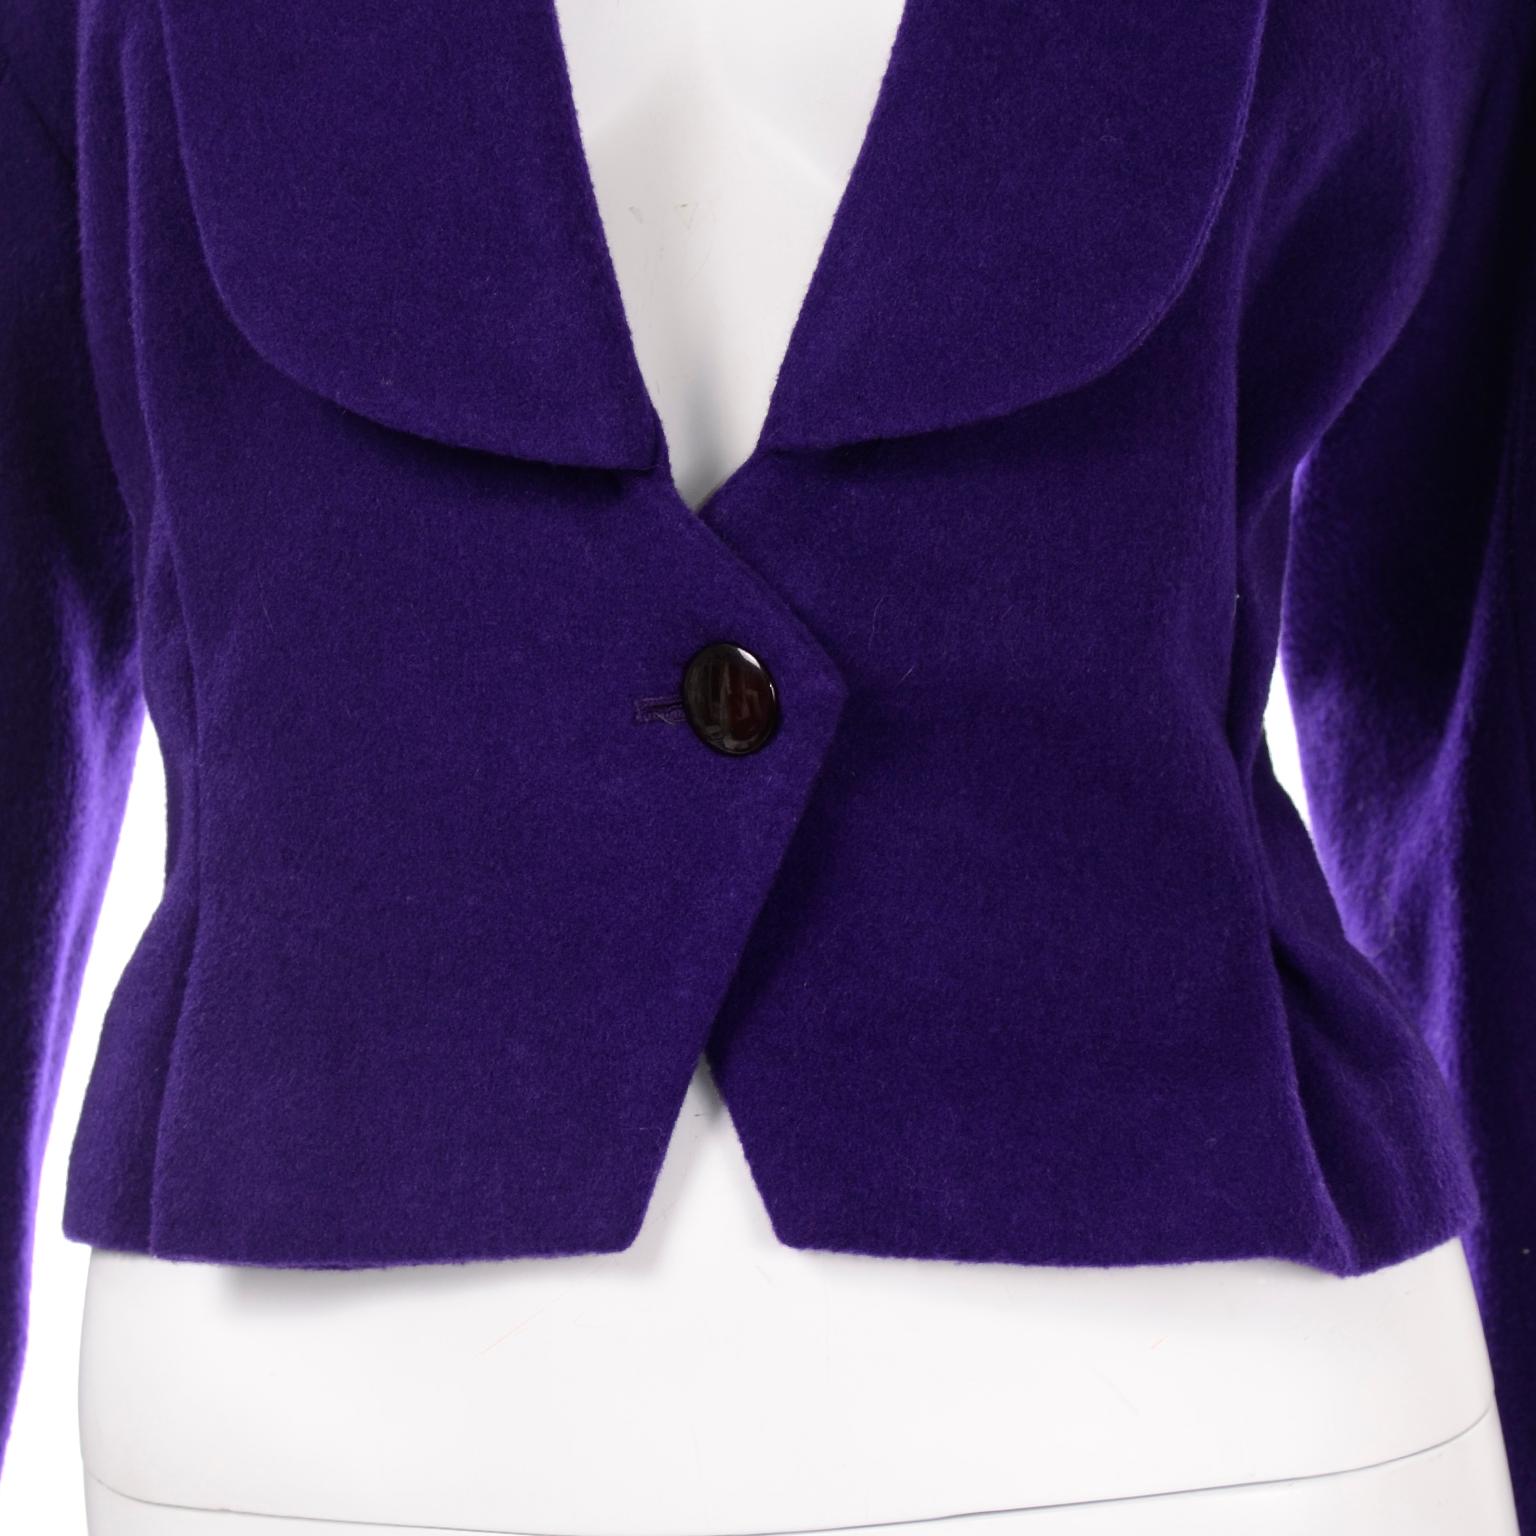 Deadstock Vintage 1988 Norma Walters Cashmere Blend Purple Blazer Jacket w Tag In New Condition For Sale In Portland, OR